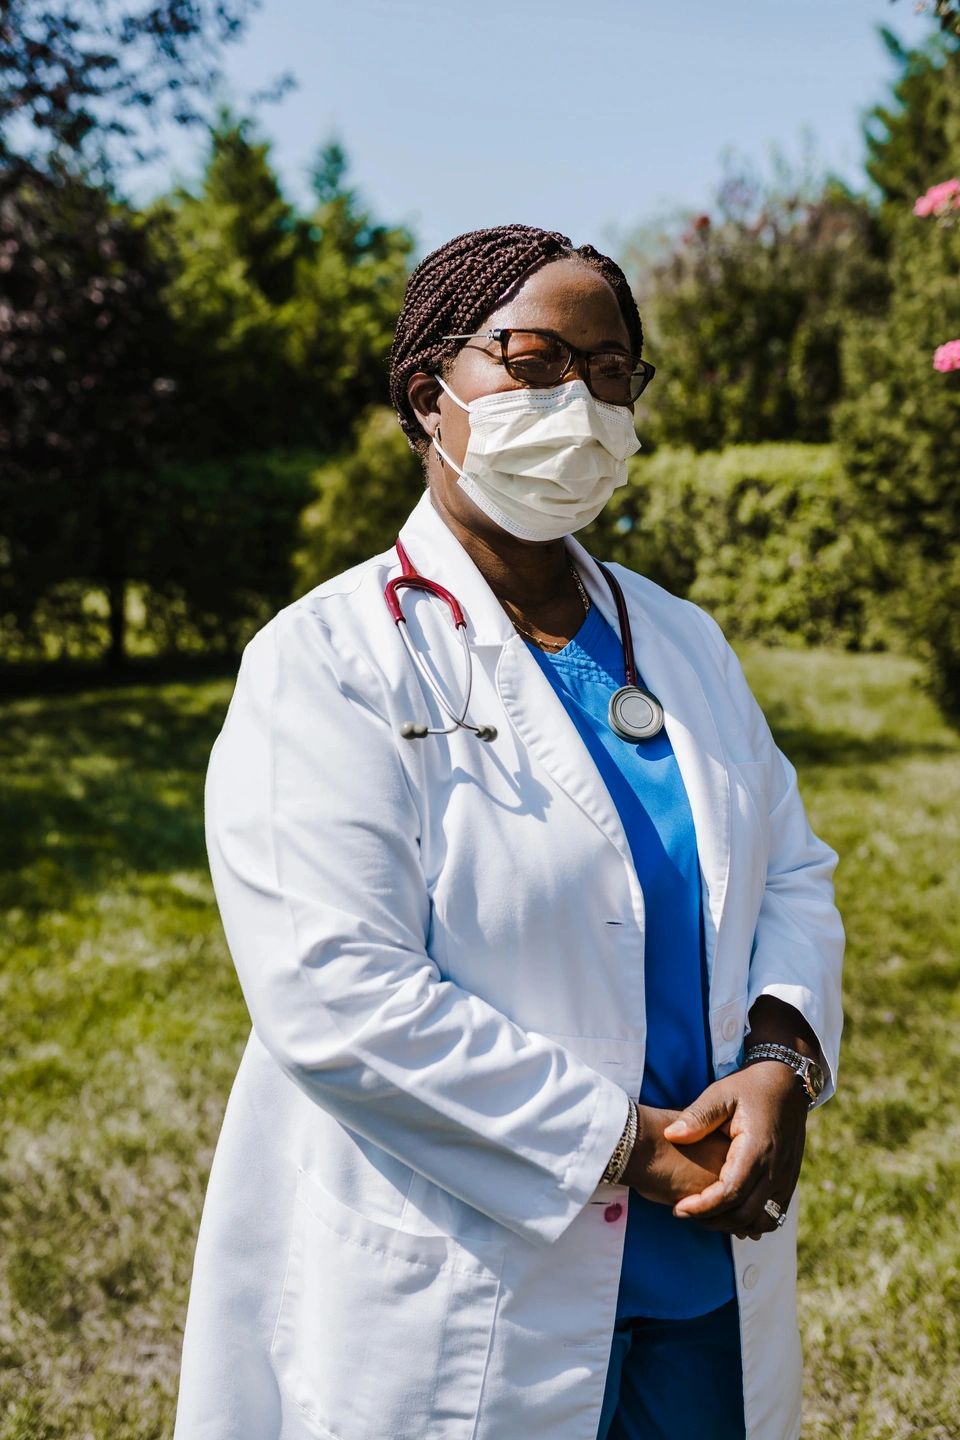 female doctor with white coat and mask